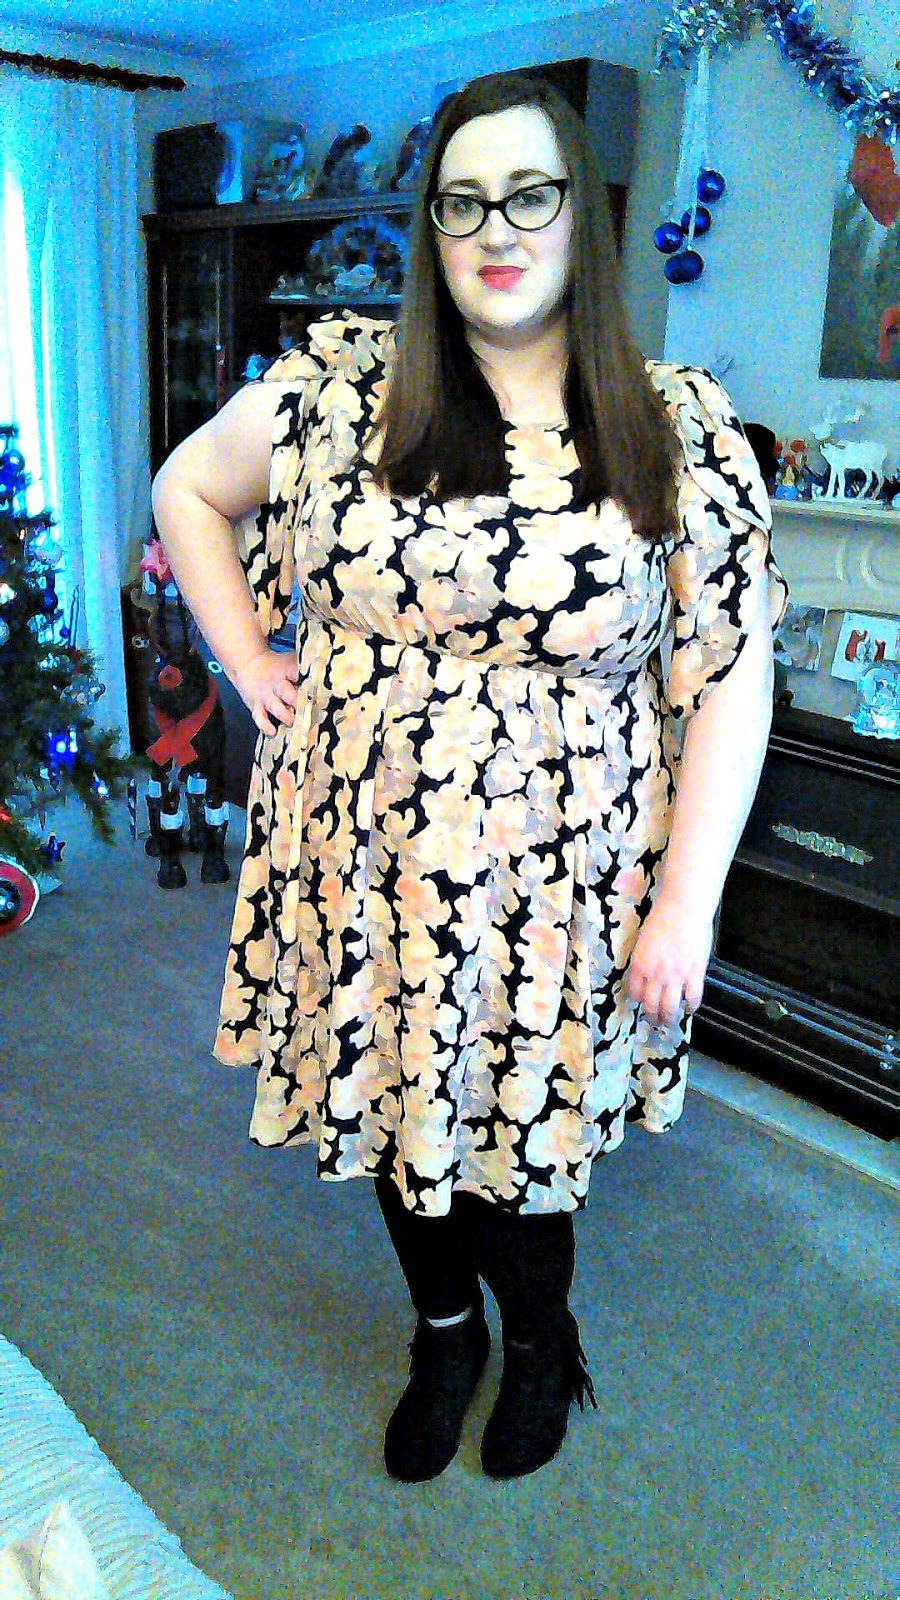 fat plus size girl bbw (size 20/22) wearing a That Day for Evans Floral dress 